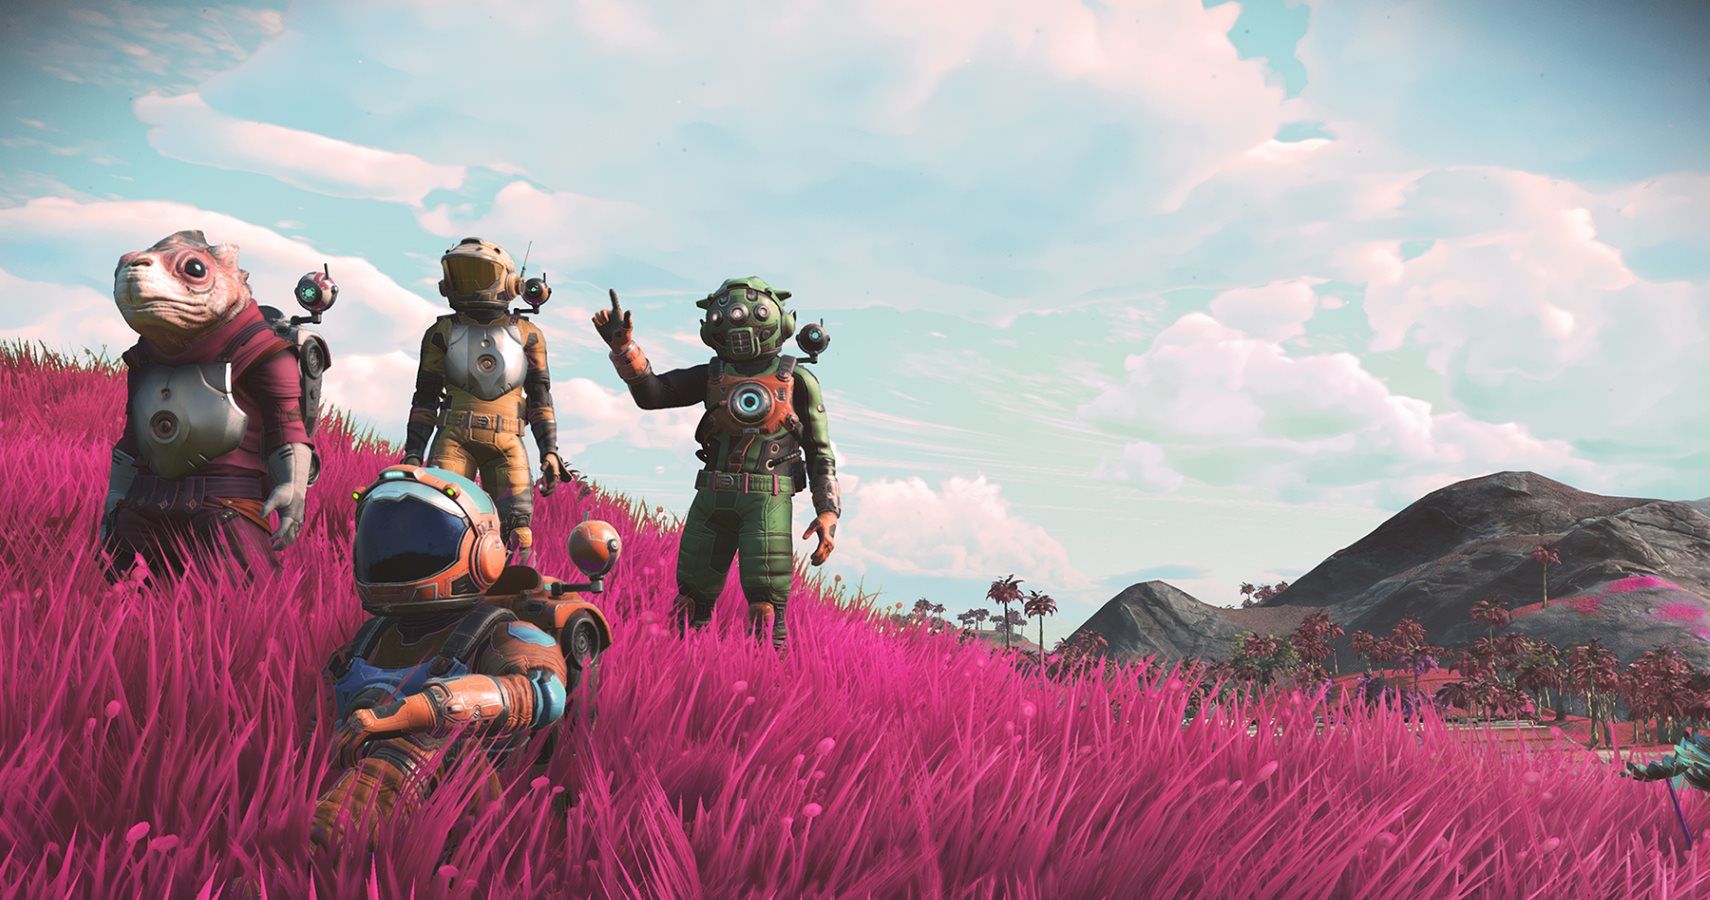 Gog.com Offers Extended Refund Policy For No Man's Sky Over Disappointing Multiplayer Update